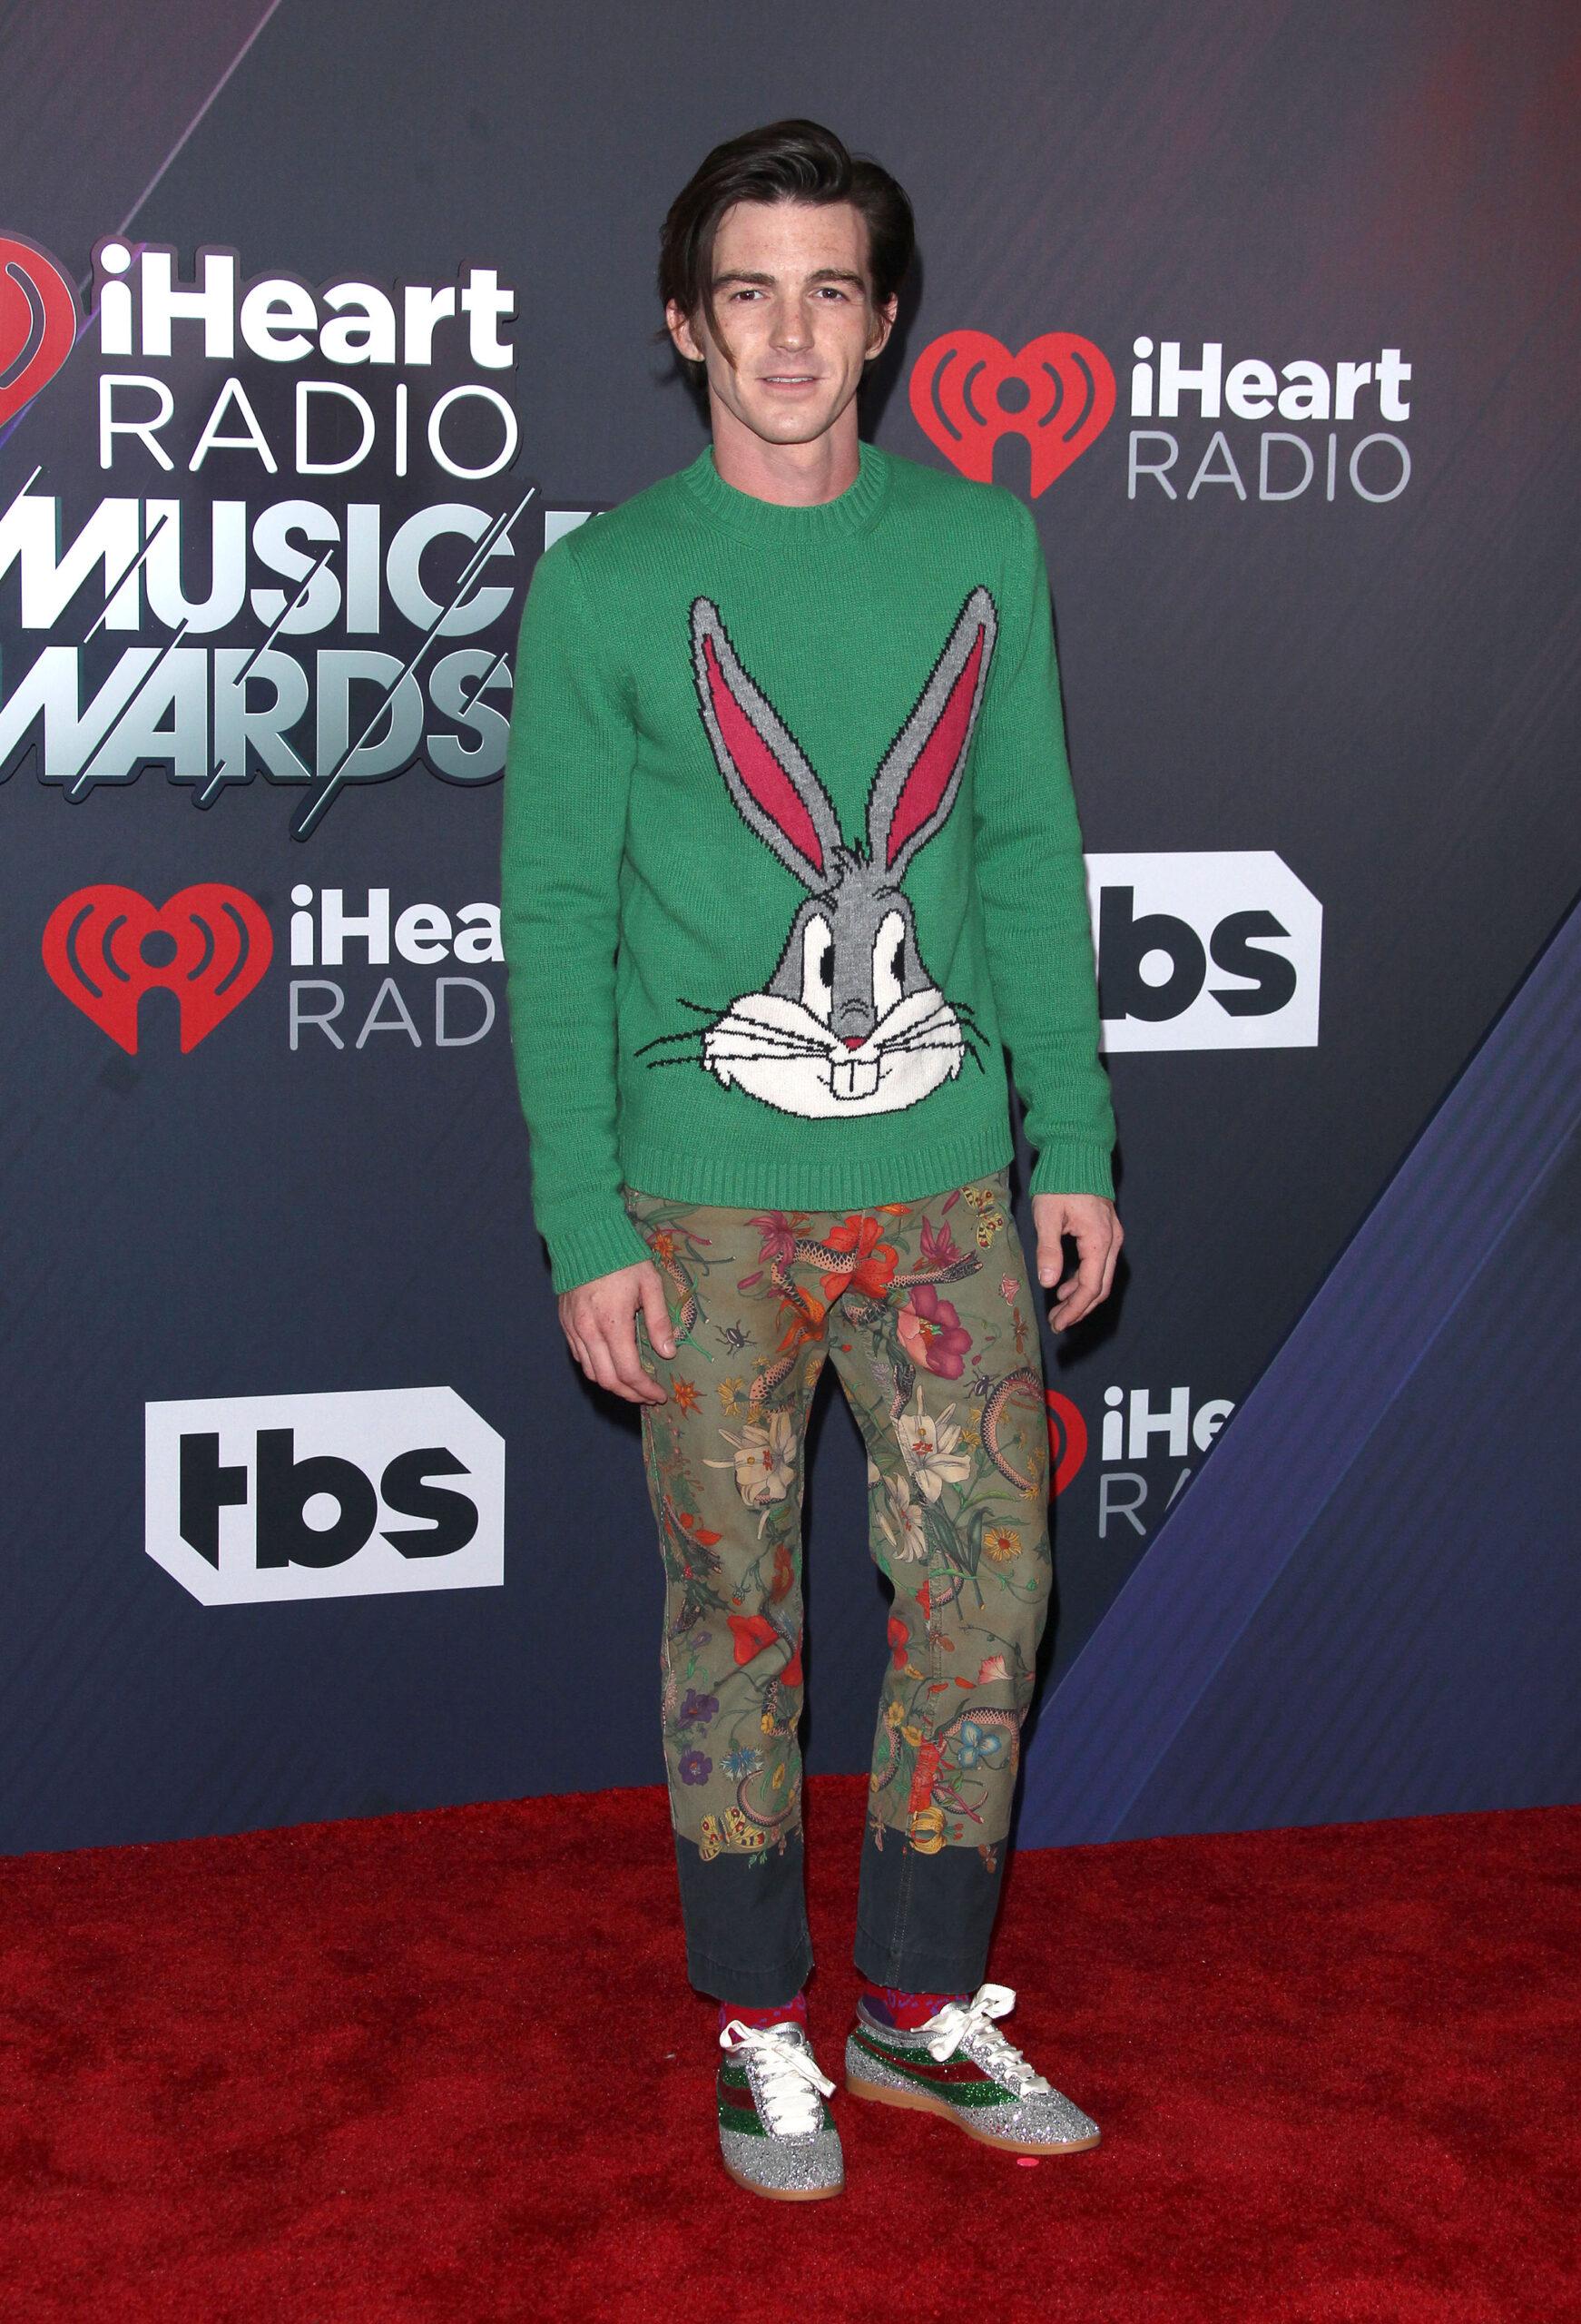 Drake Bell at 2018 iHeartRadio Music Awards - Arrivals